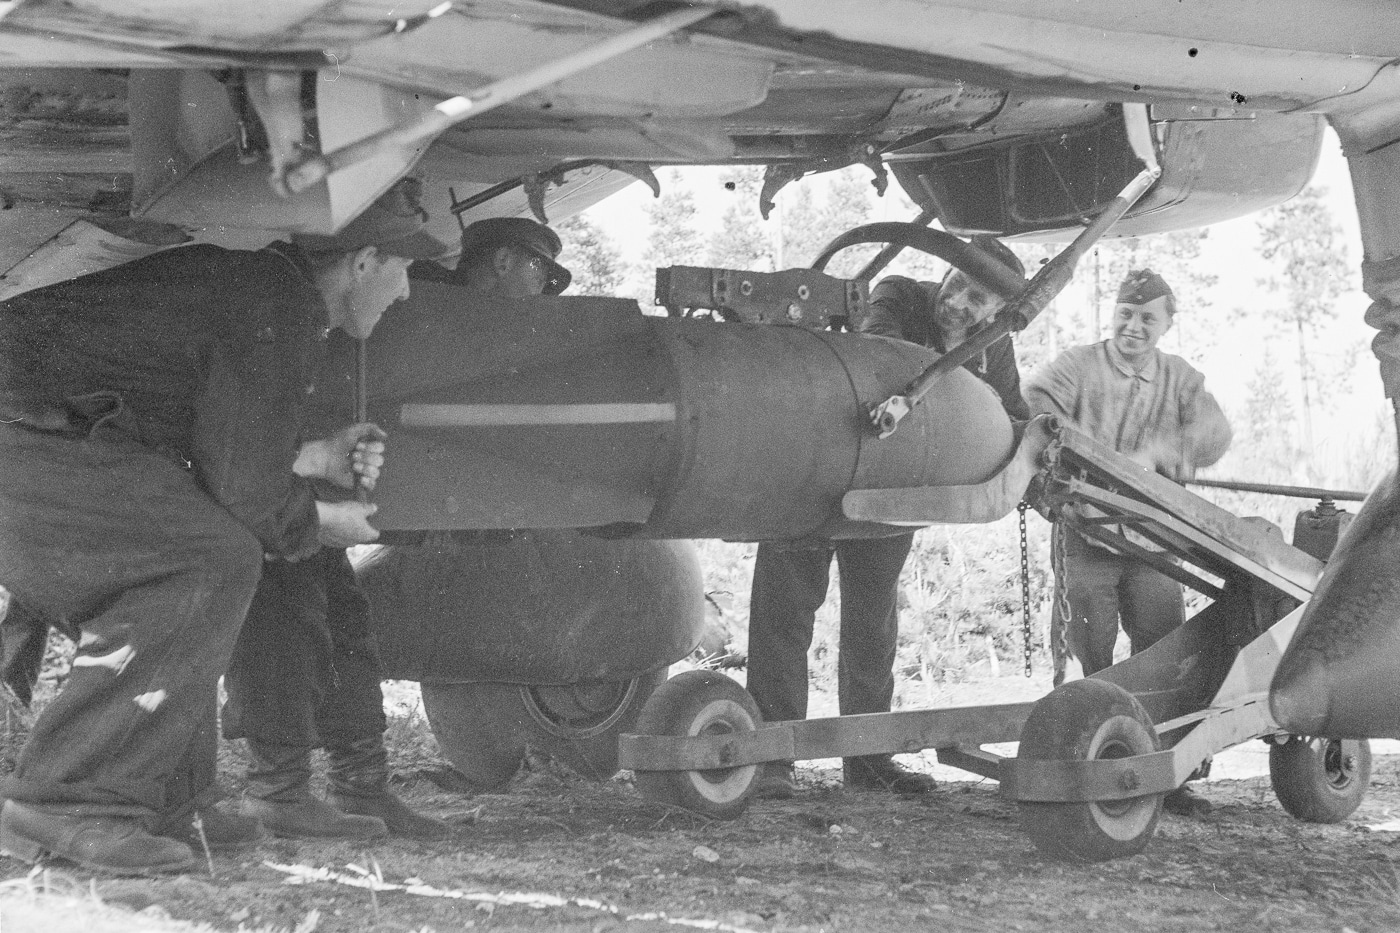 Shown is a 250 kg bomb being lifted onto a Stuka frame hanger using a bomb crane. The bomb is already attached to a "fork" whose function is to prevent the bomb from touching the propeller.